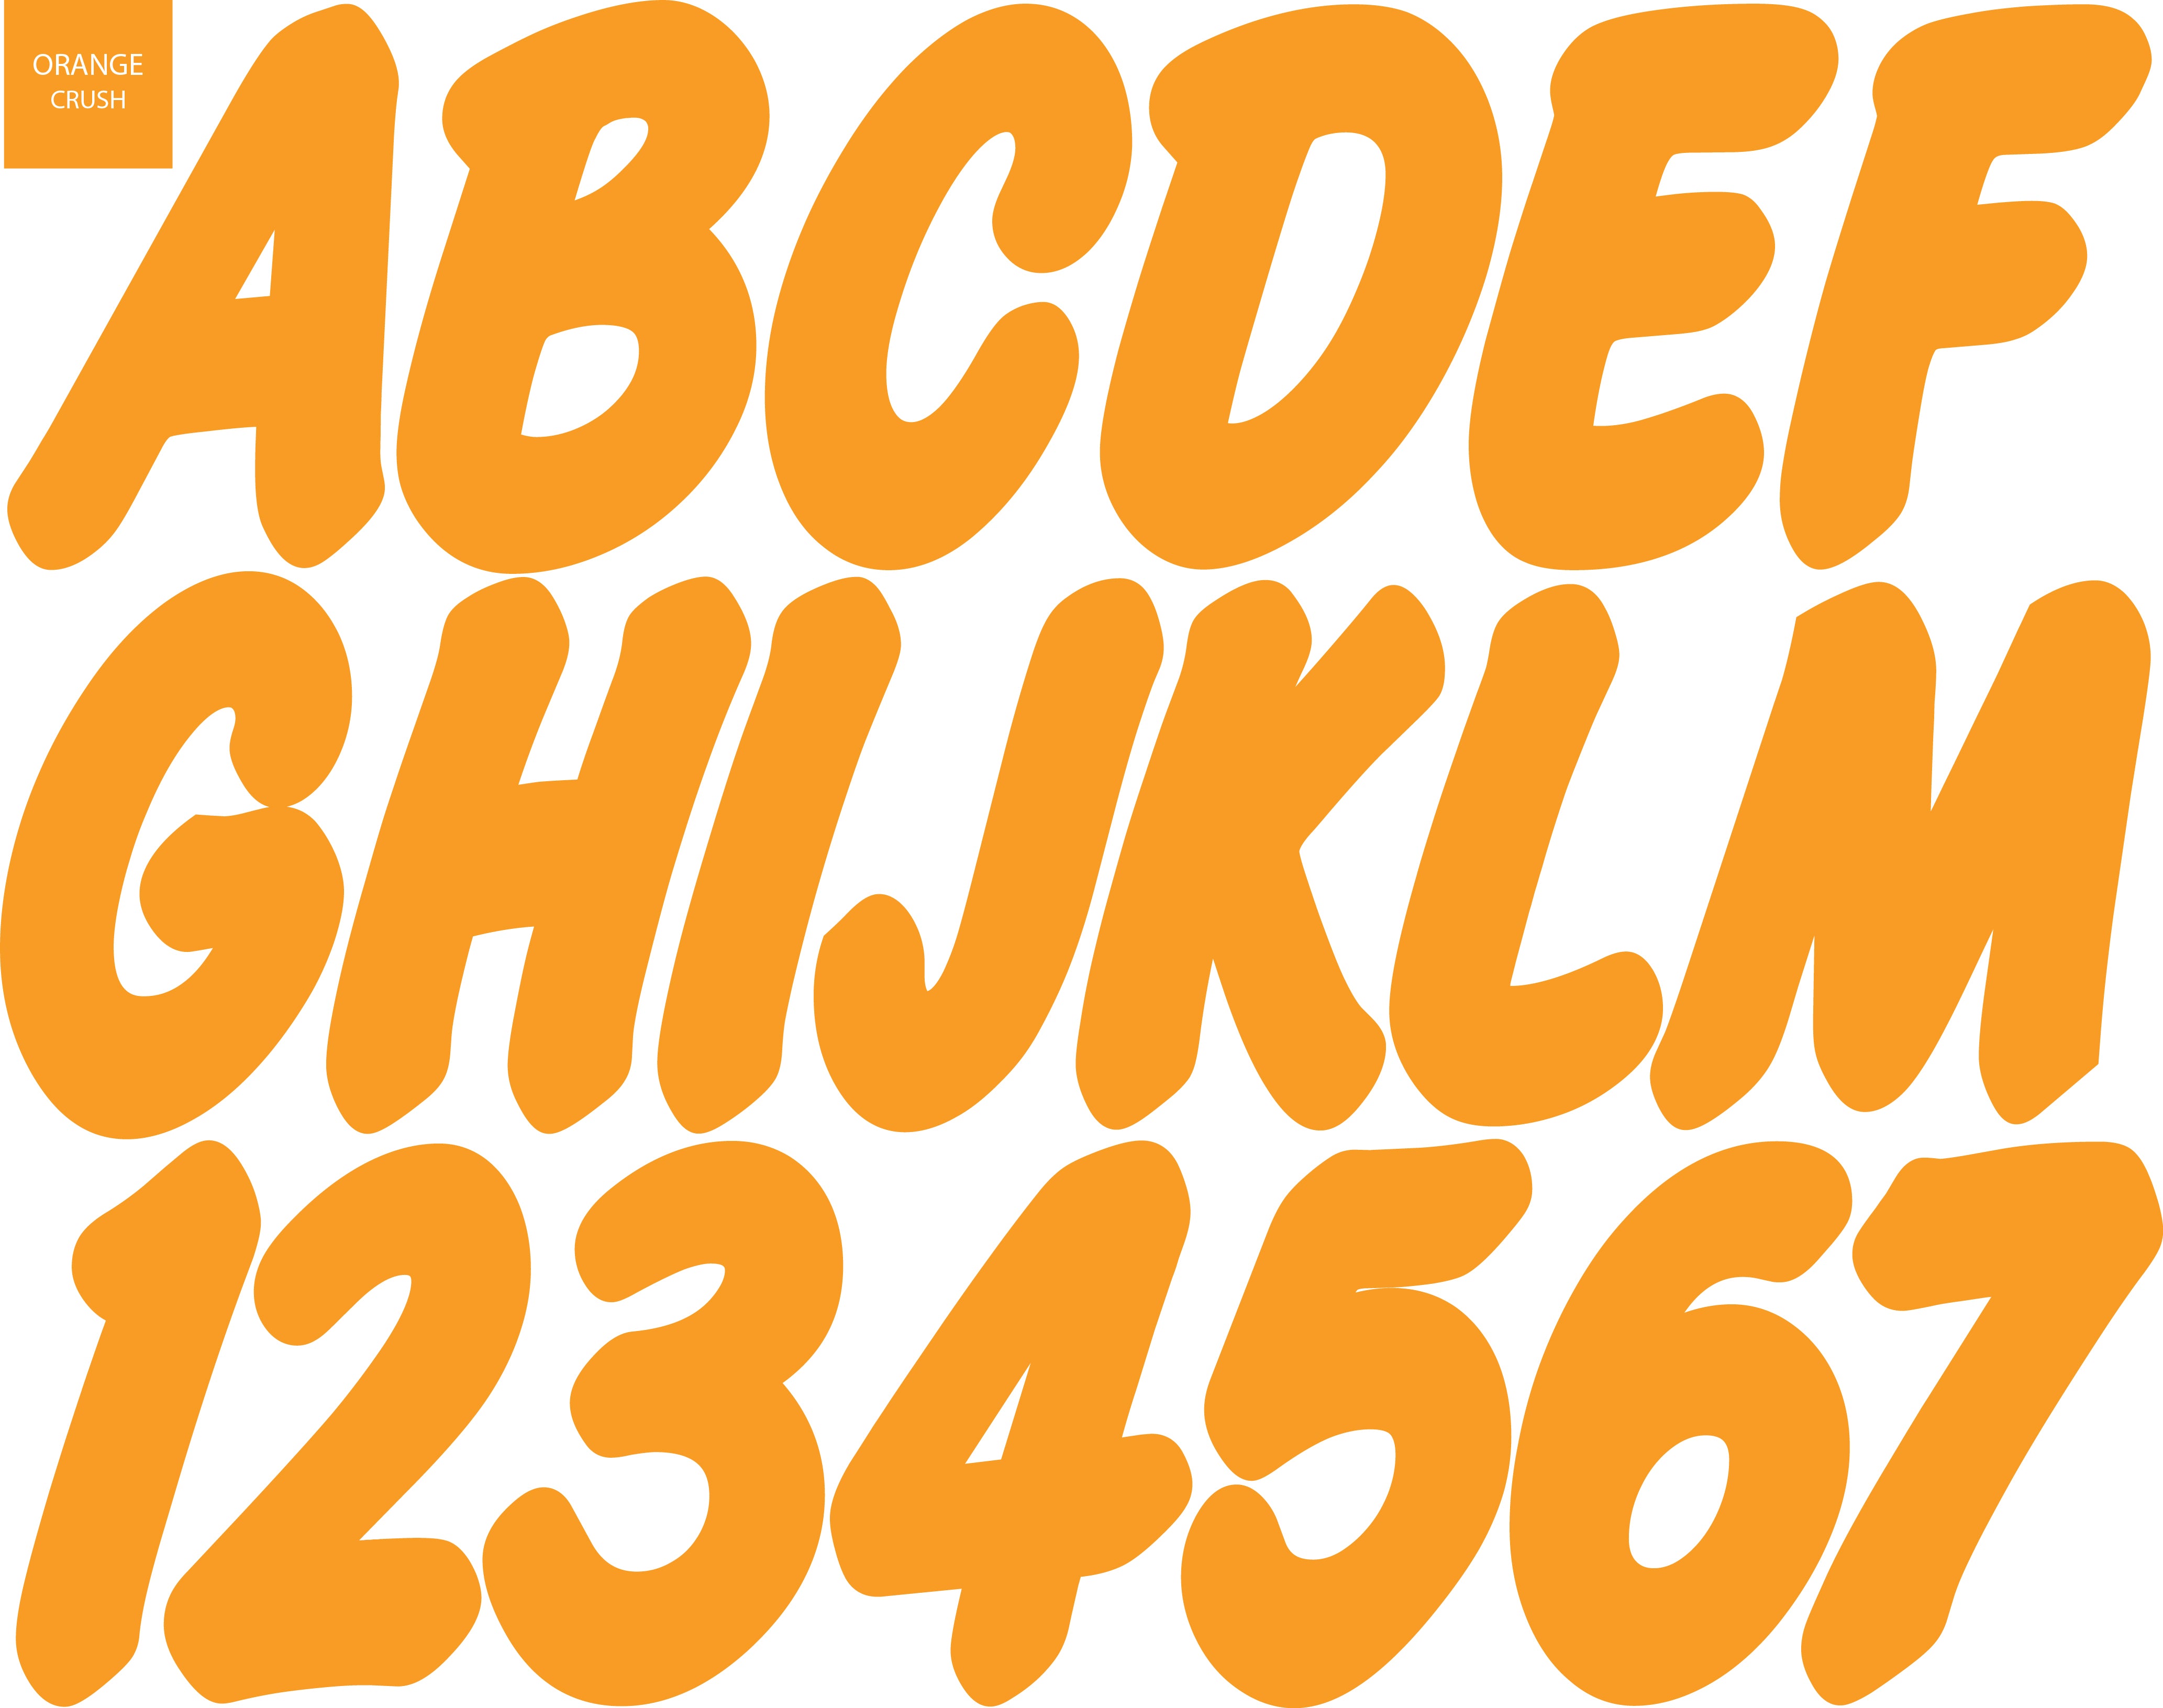 Stiffie Whip-One Orange Crush Super Sticky 3" Alpha Numeric Registration Identification Numbers Stickers Decals for Sea-Doo Spark, Inflatable Boats, Ribs, Hypalon/PVC, PWC and Boats